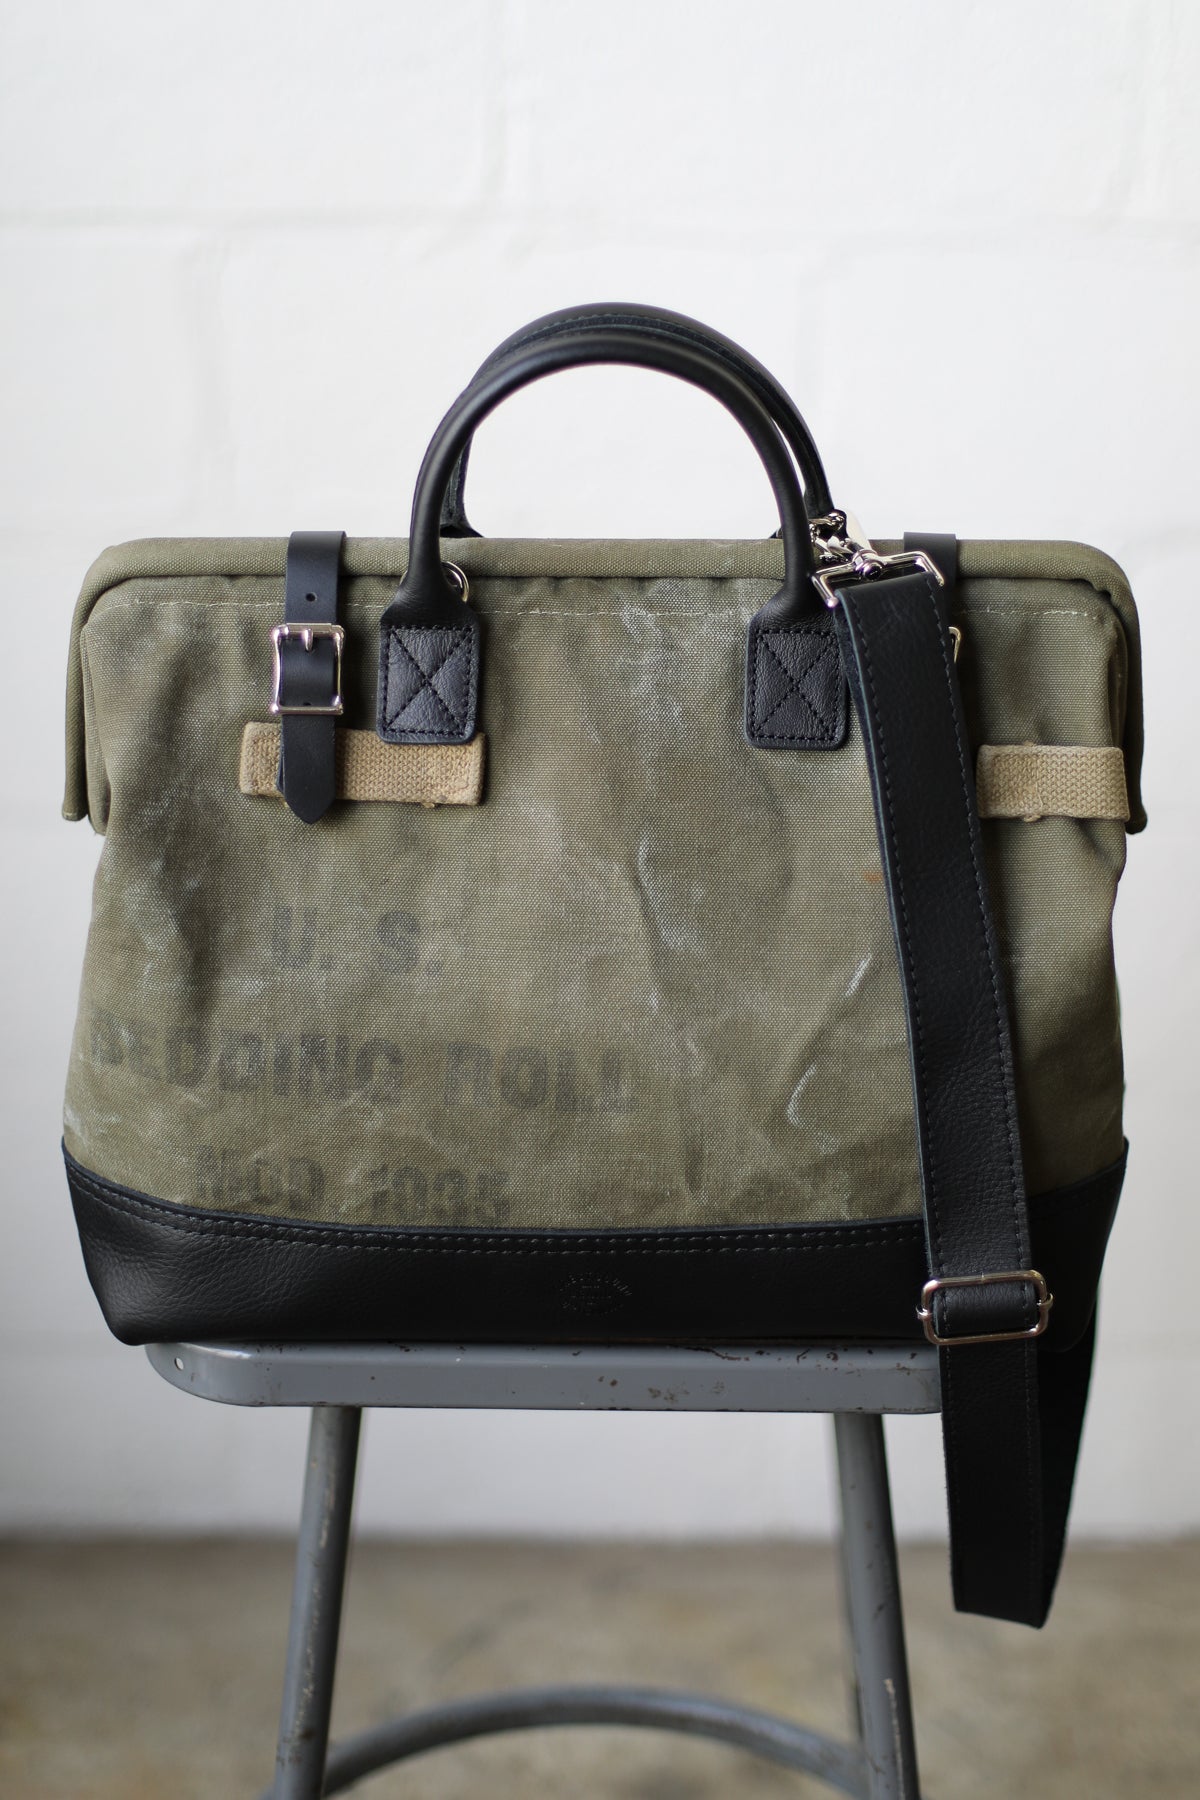 1930's era Salvaged Military Canvas Carryall